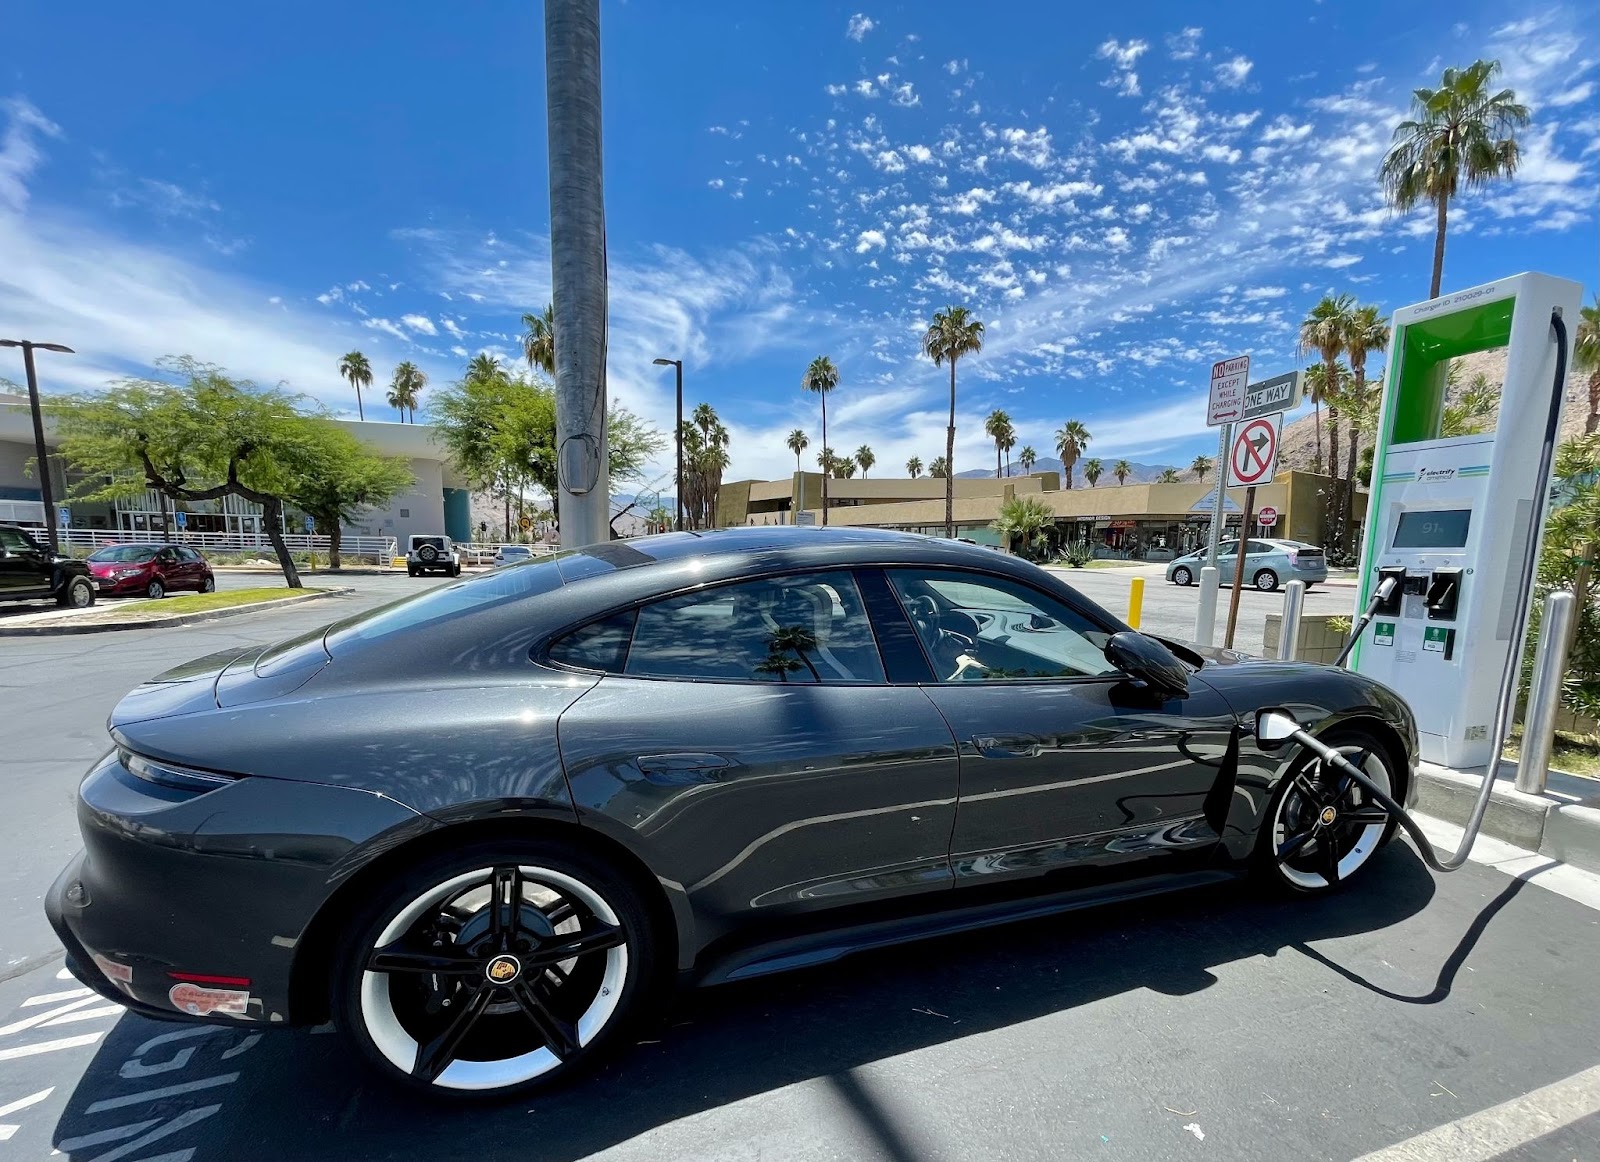 charging a Porsche all electric vehicle (EV) in palm springs, Florida